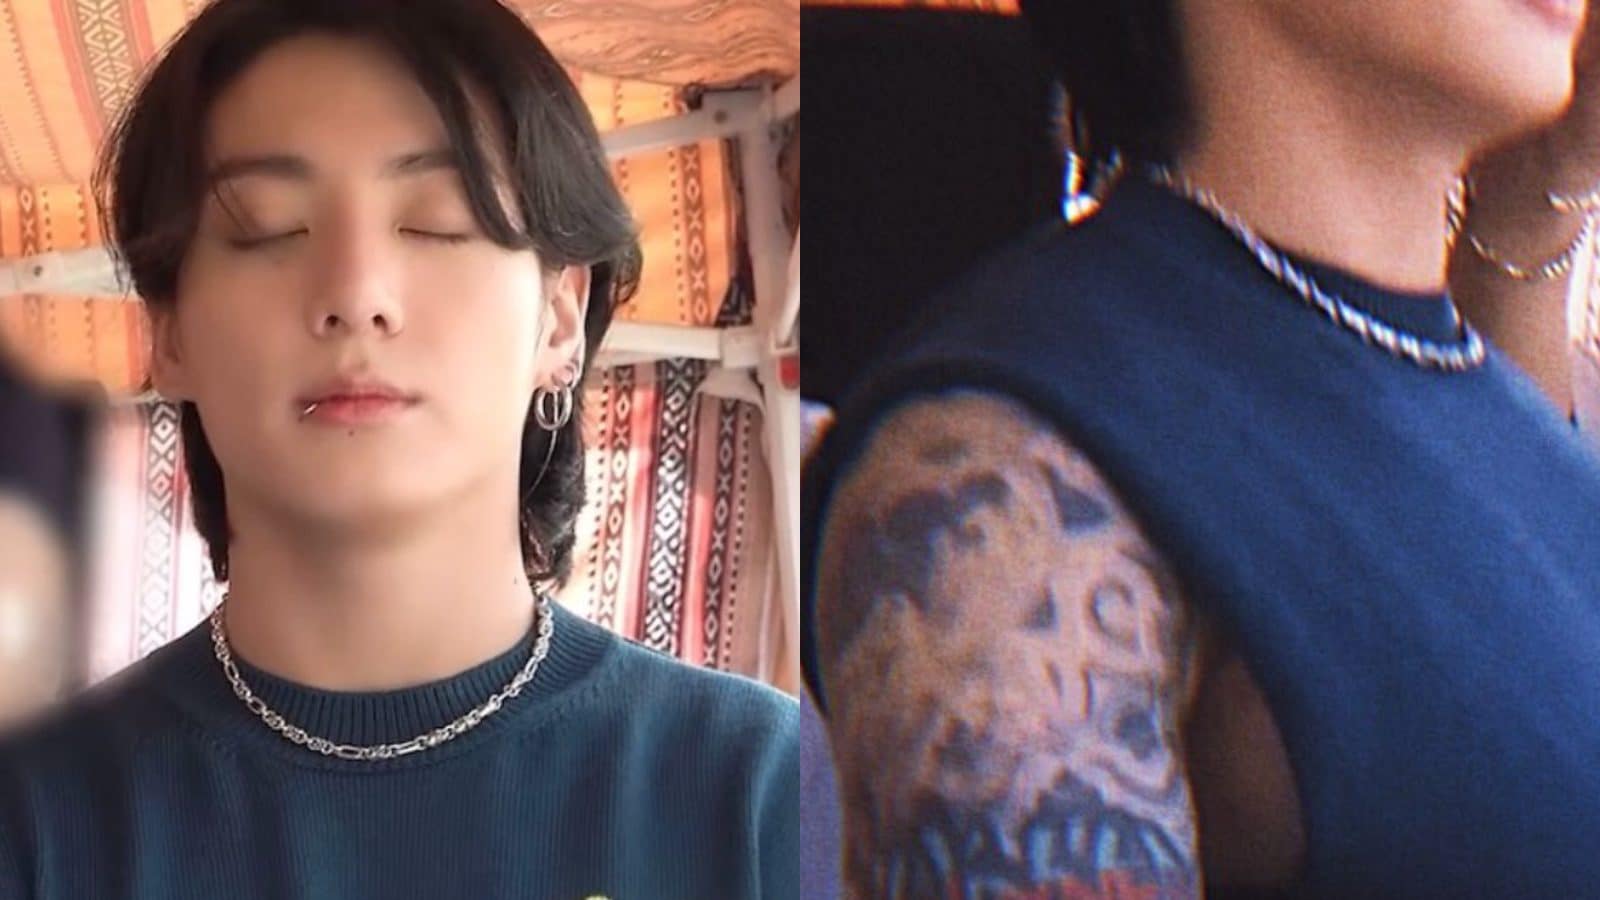 BTS's Jungkook Nearly Exposed His Tattoos, Now We're Cursing His Reflexes